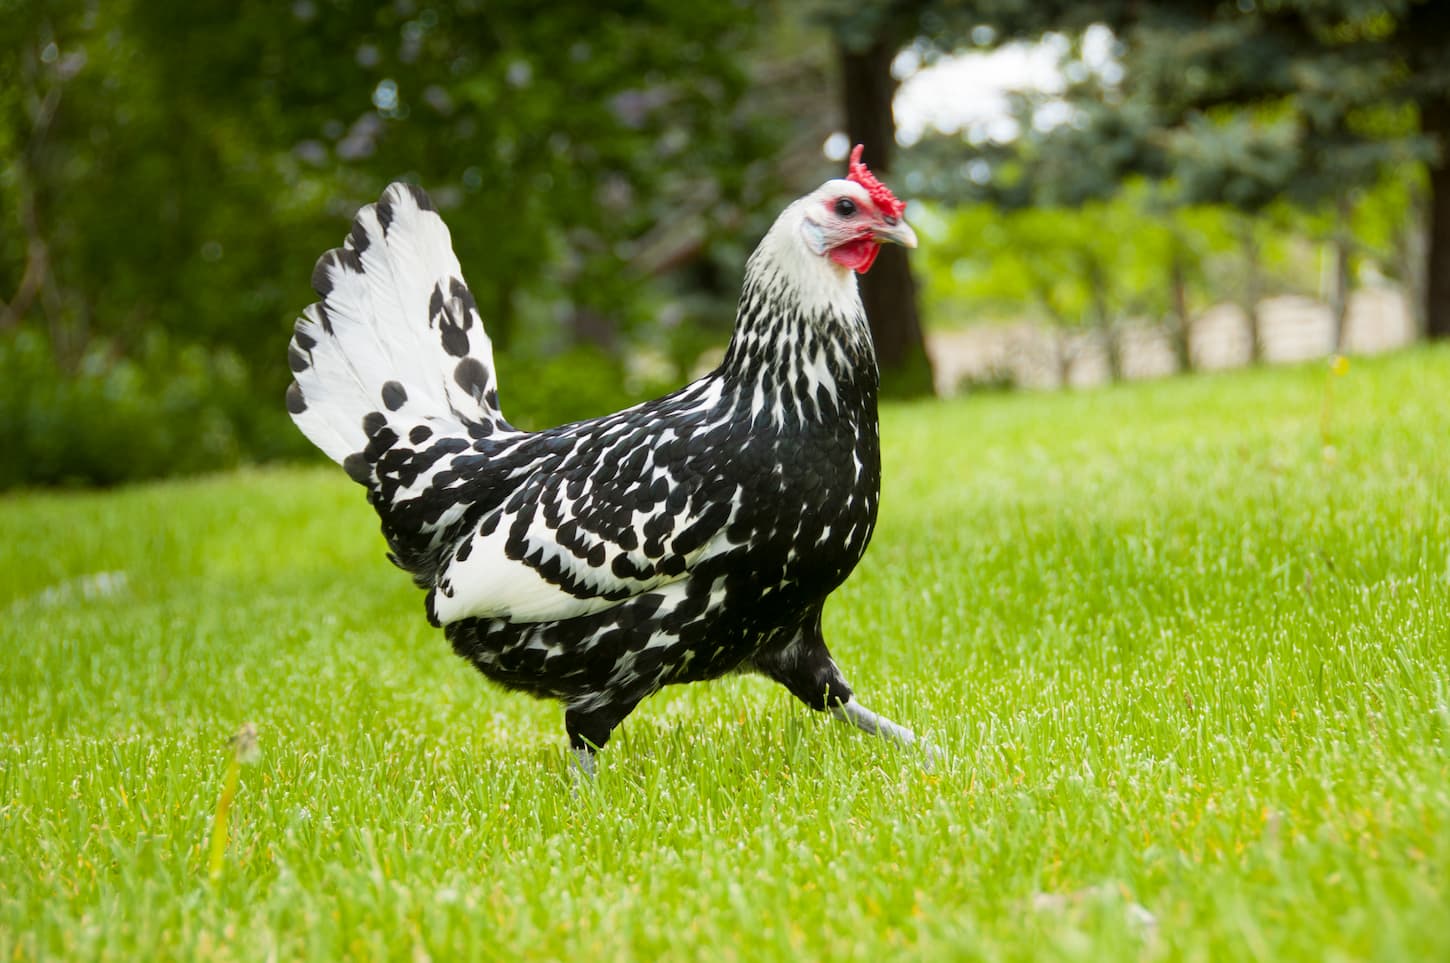 An image of a hen on a traditional free-range poultry organic farm grazing on the grass.